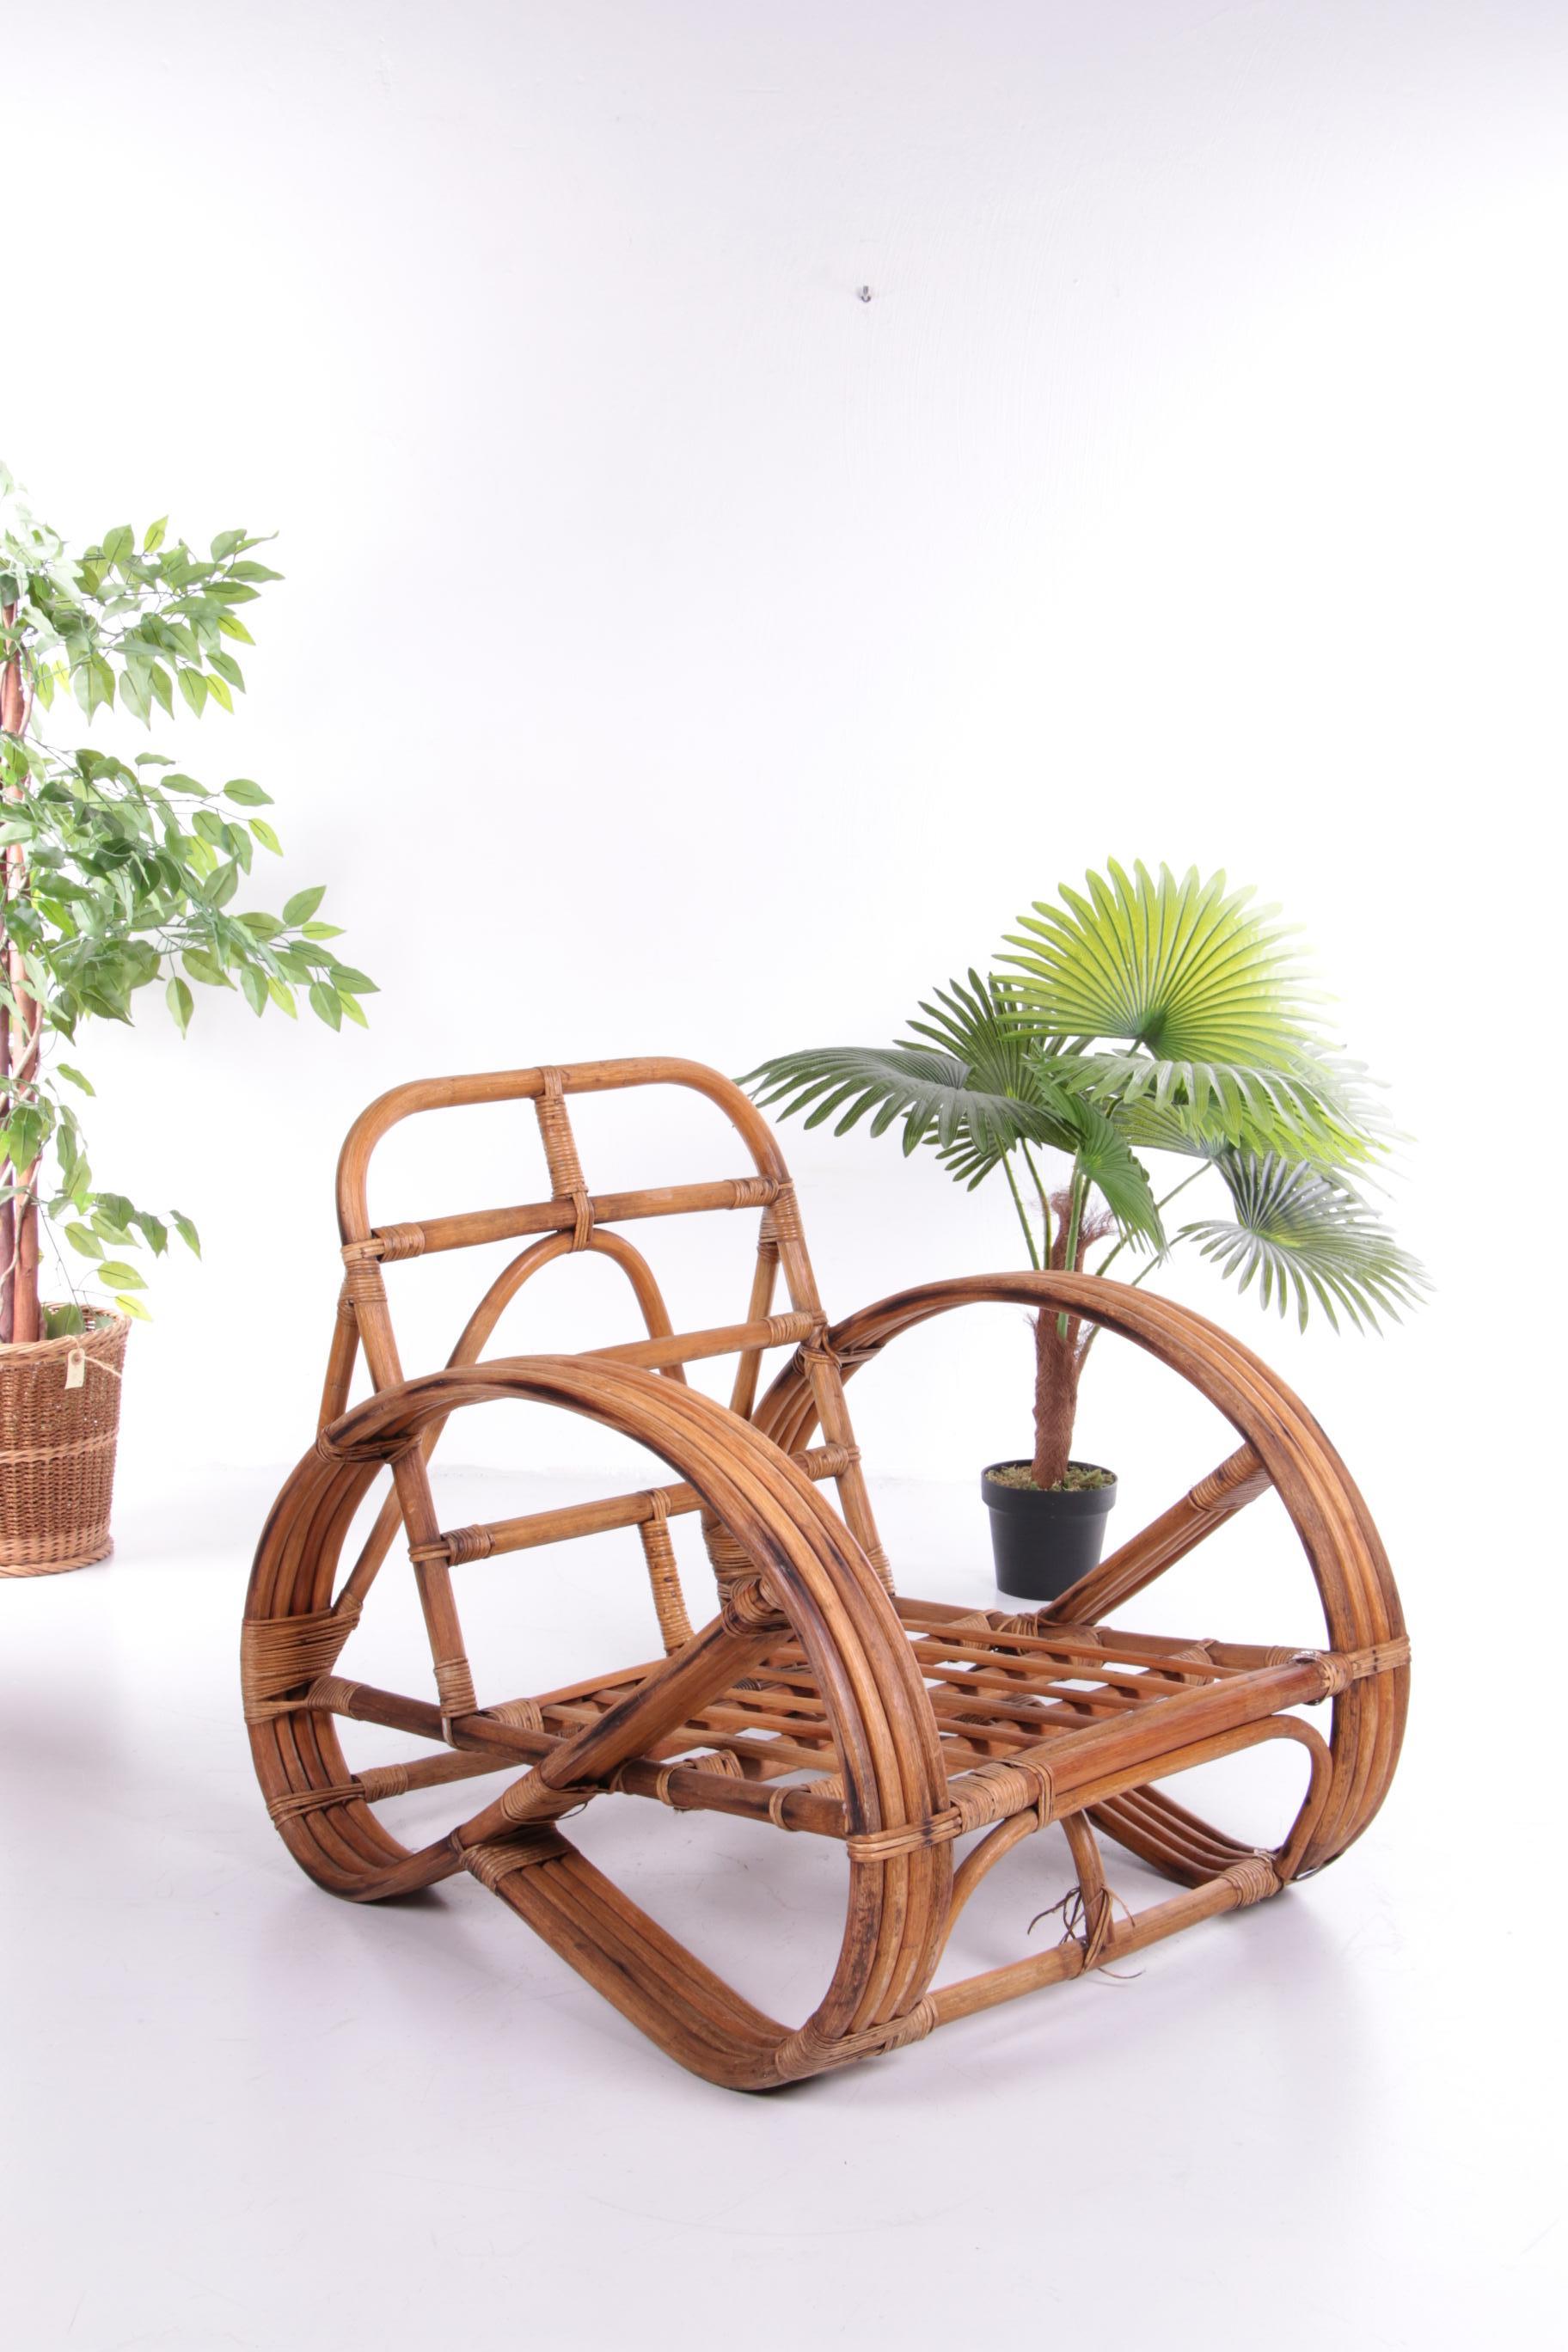 Vintage rattan bamboo lounge armchair Paul Frankl


Why dream of sultry summer evenings, when you can enjoy the tropical atmosphere all year round with this lounge armchair.

This great bamboo armchair is by Paul Frankl and comes from the